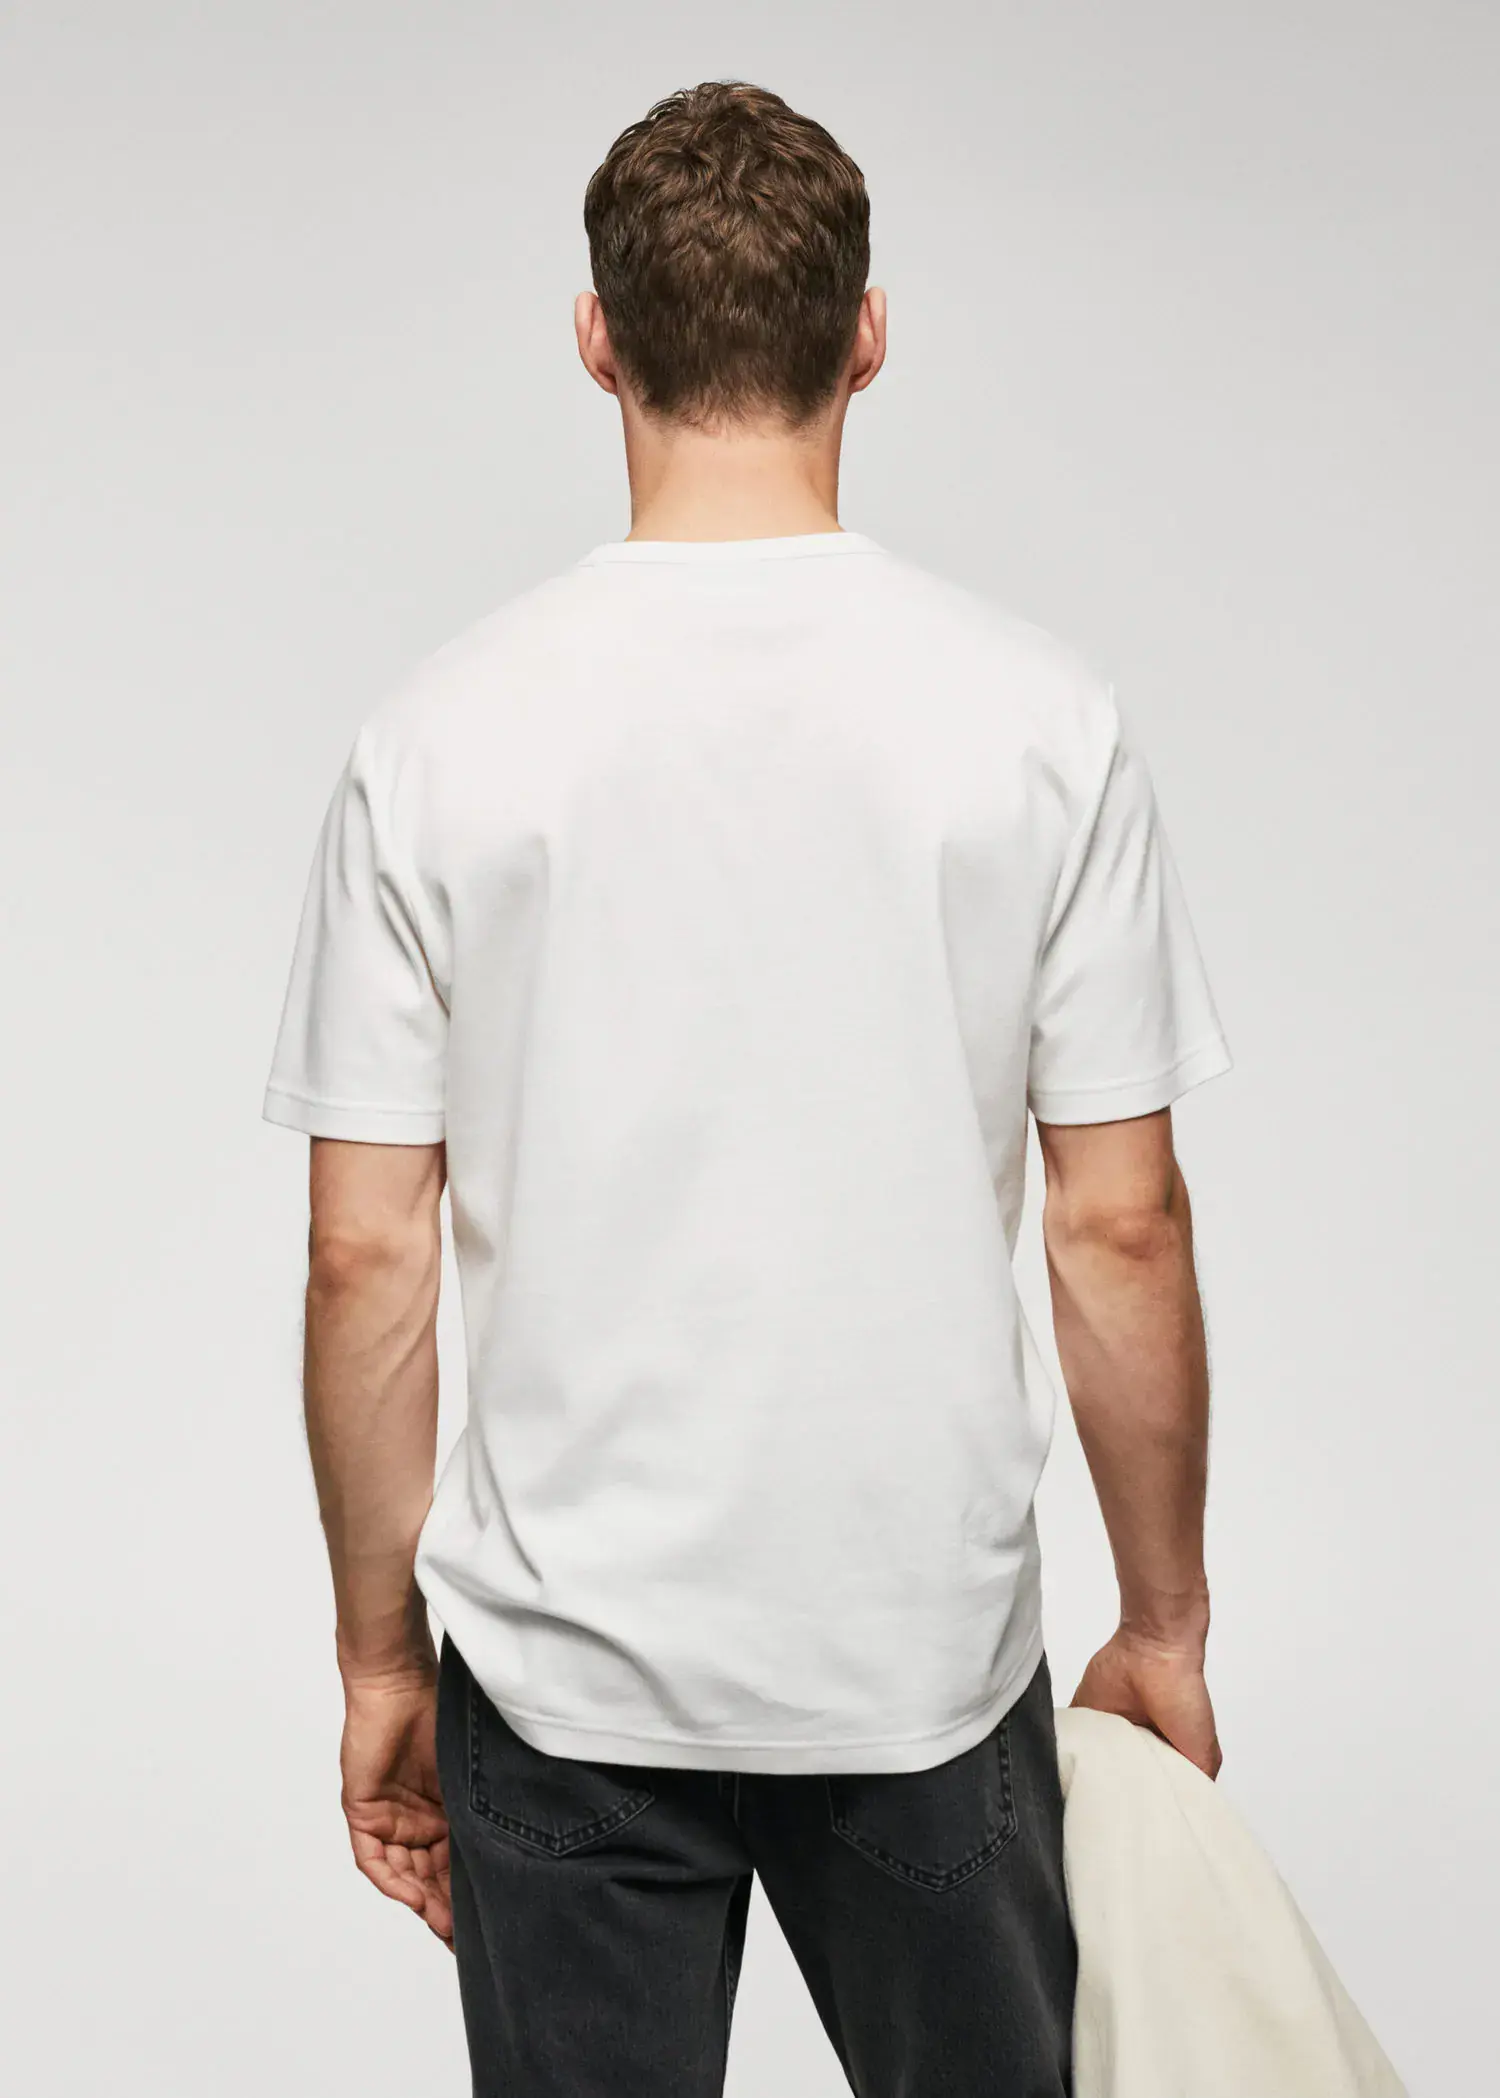 Mango 100% cotton t-shirt with pocket. a man in a white shirt is holding his hands behind his back. 